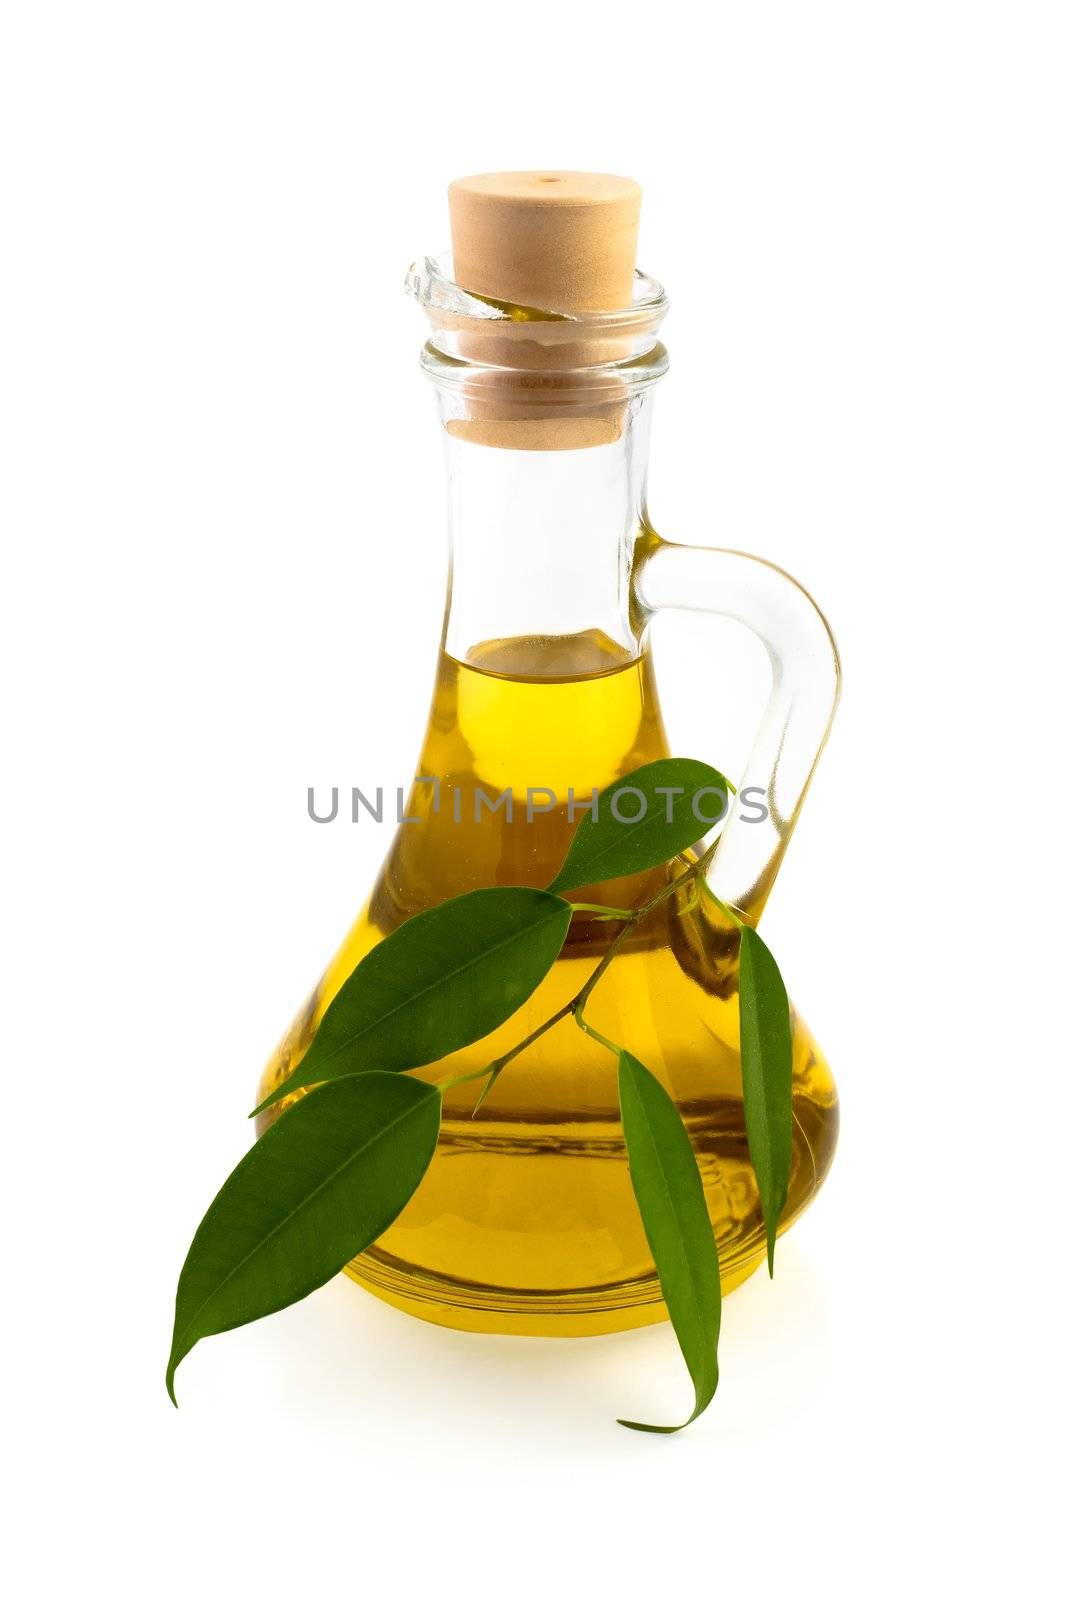 An image of a bottle of olive oil